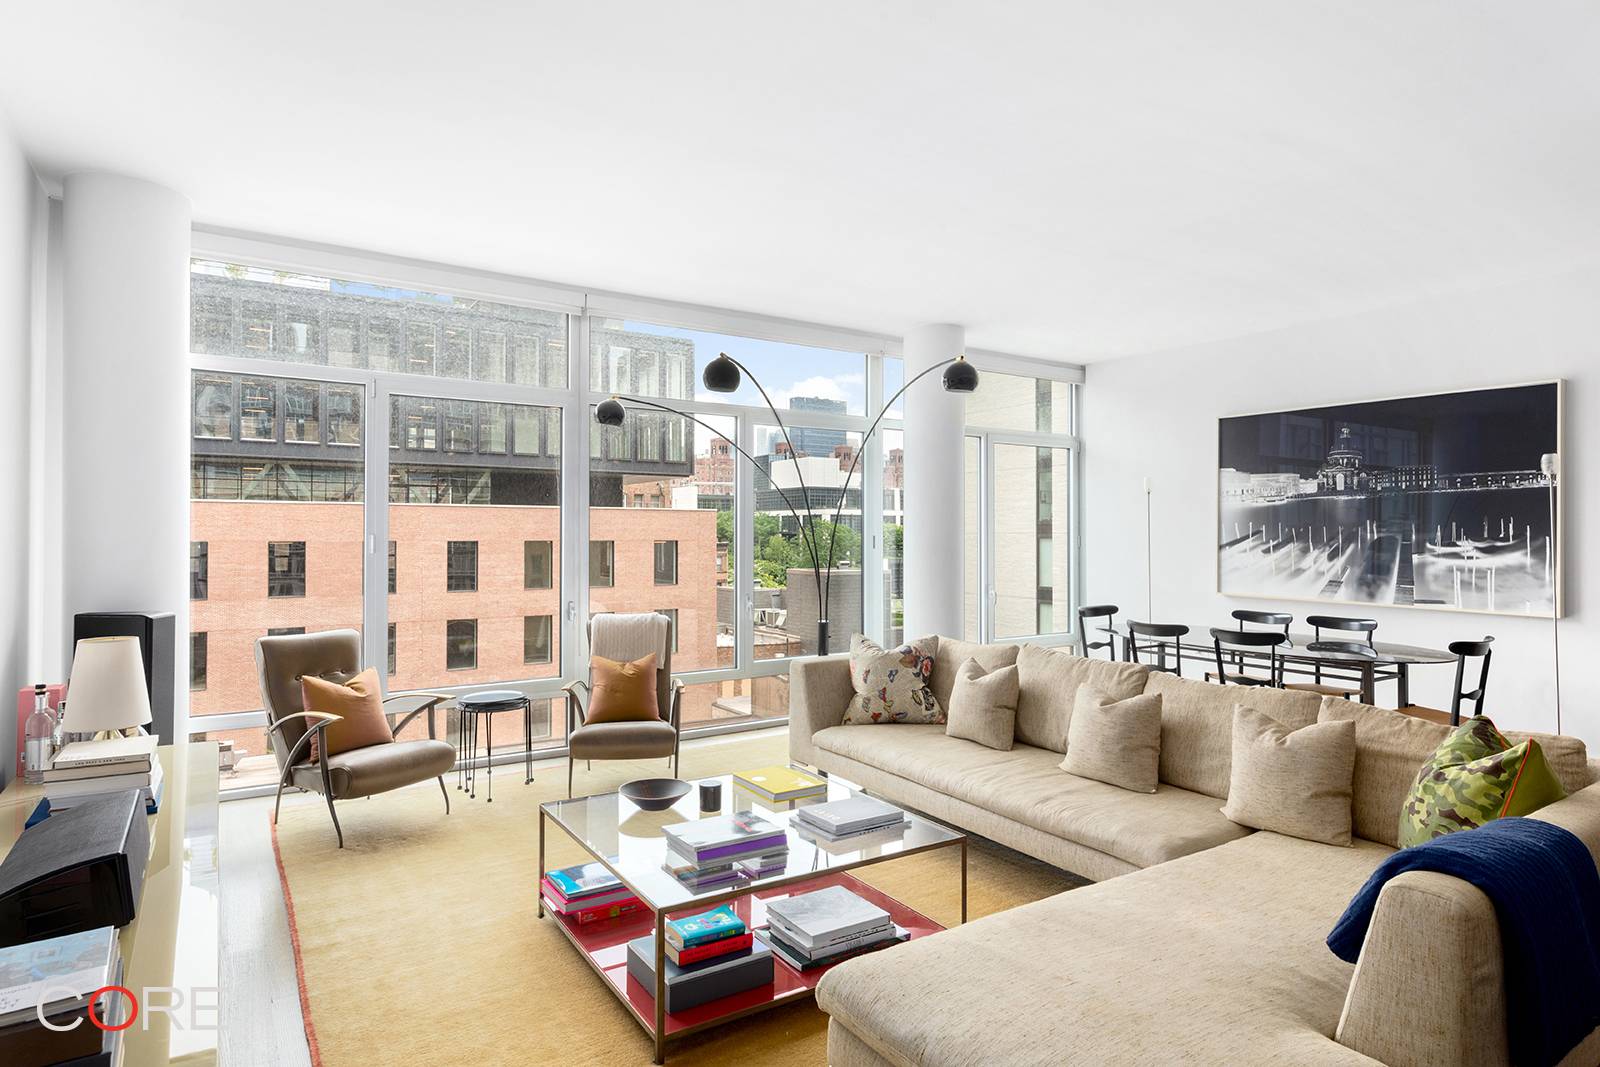 Welcome home to 6B, this bright and elegant three bedroom, three bathroom home boasts 10 foot ceilings and breathtaking views of the High Line in the desired 520 West Chelsea.